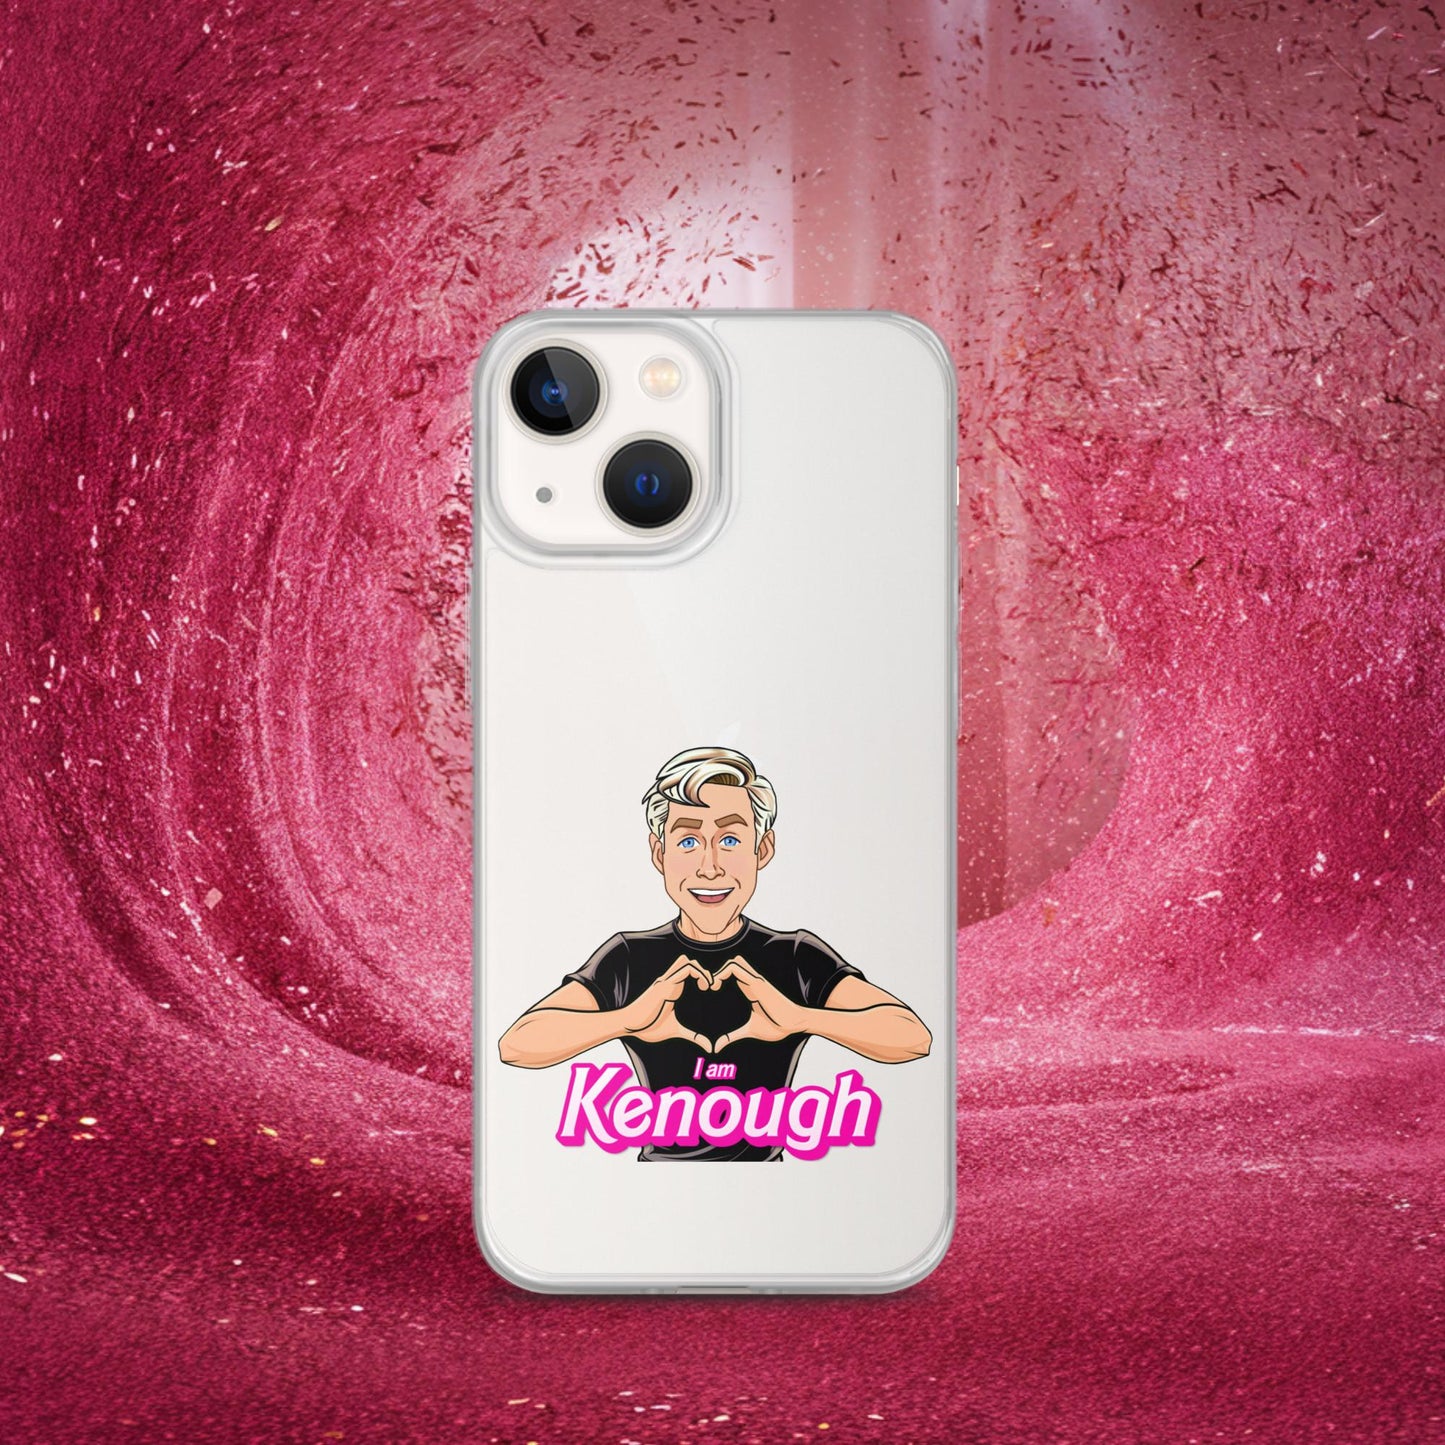 I am Kenough Ryan Gosling Ken Barbie Movie Clear Case for iPhone Next Cult Brand